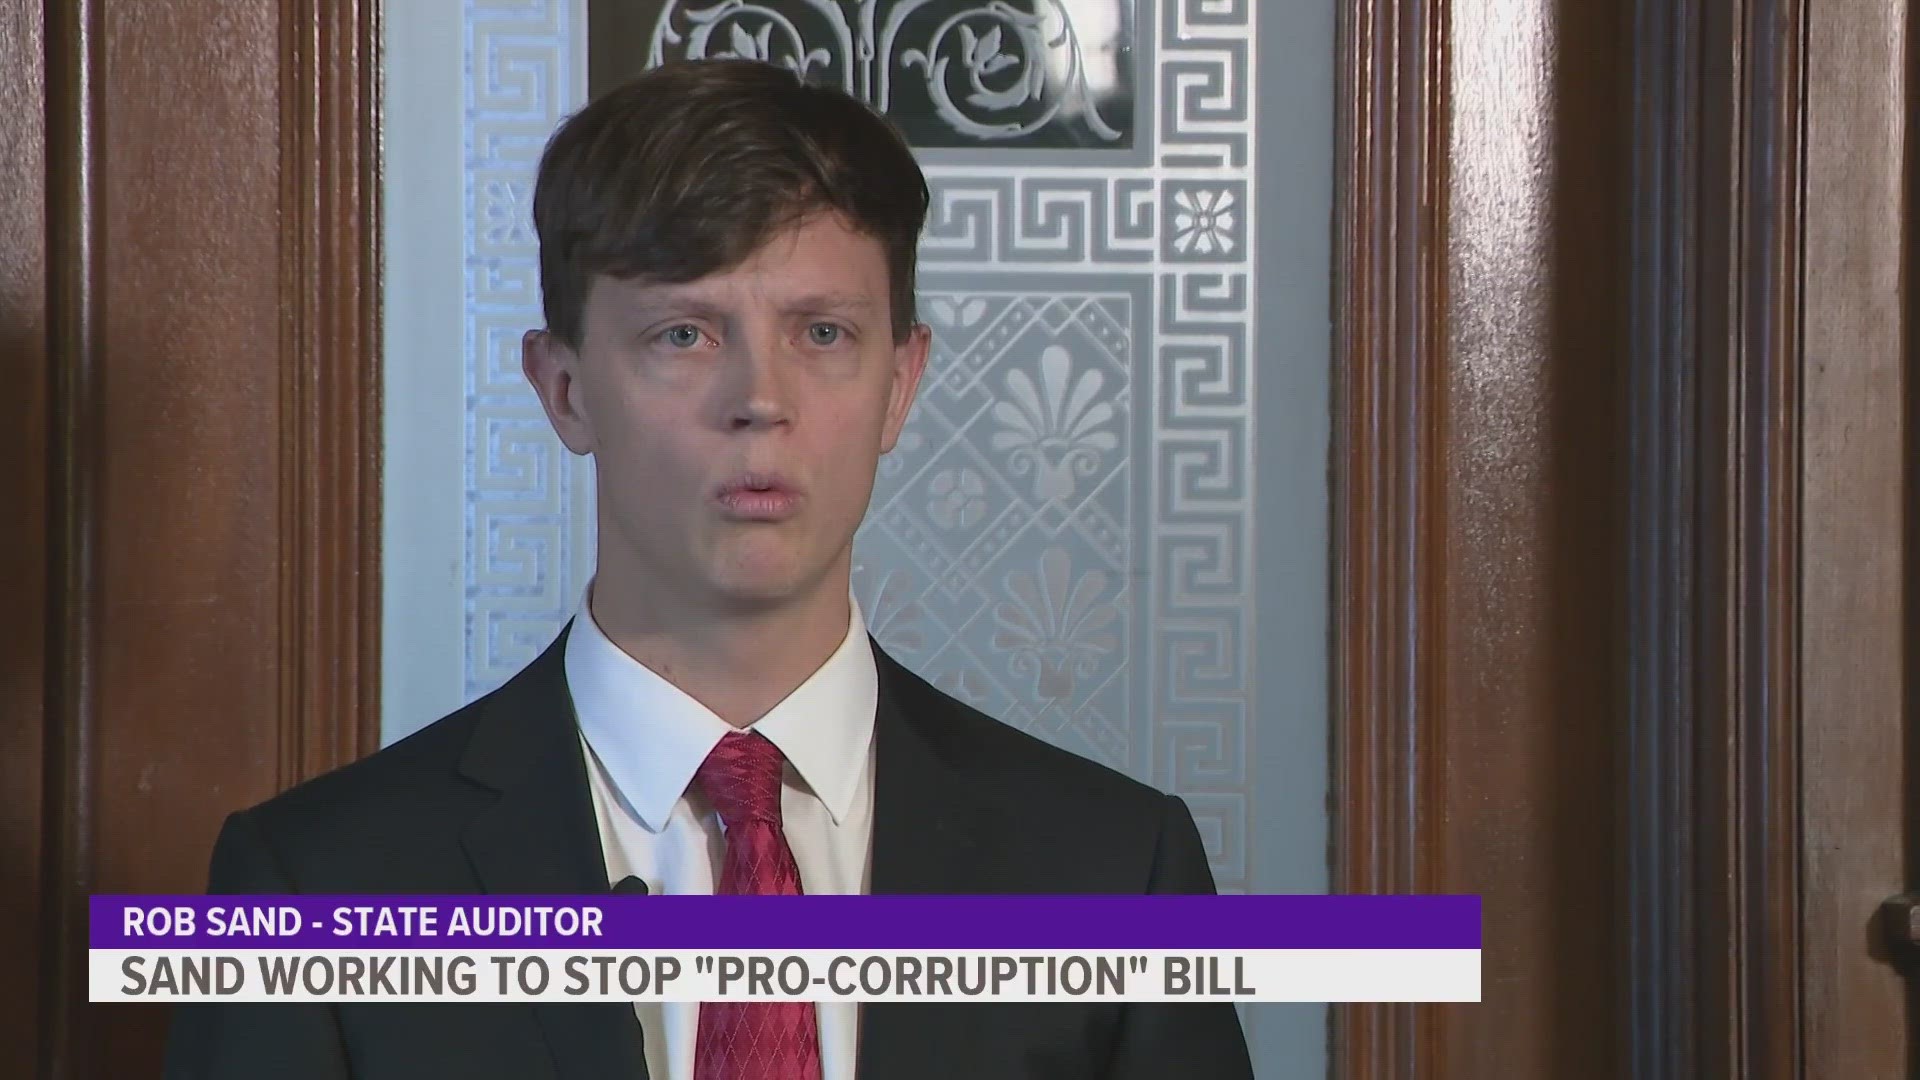 "This is the single most pro-corruption bill that has ever come out of the Iowa legislature," Sand said.